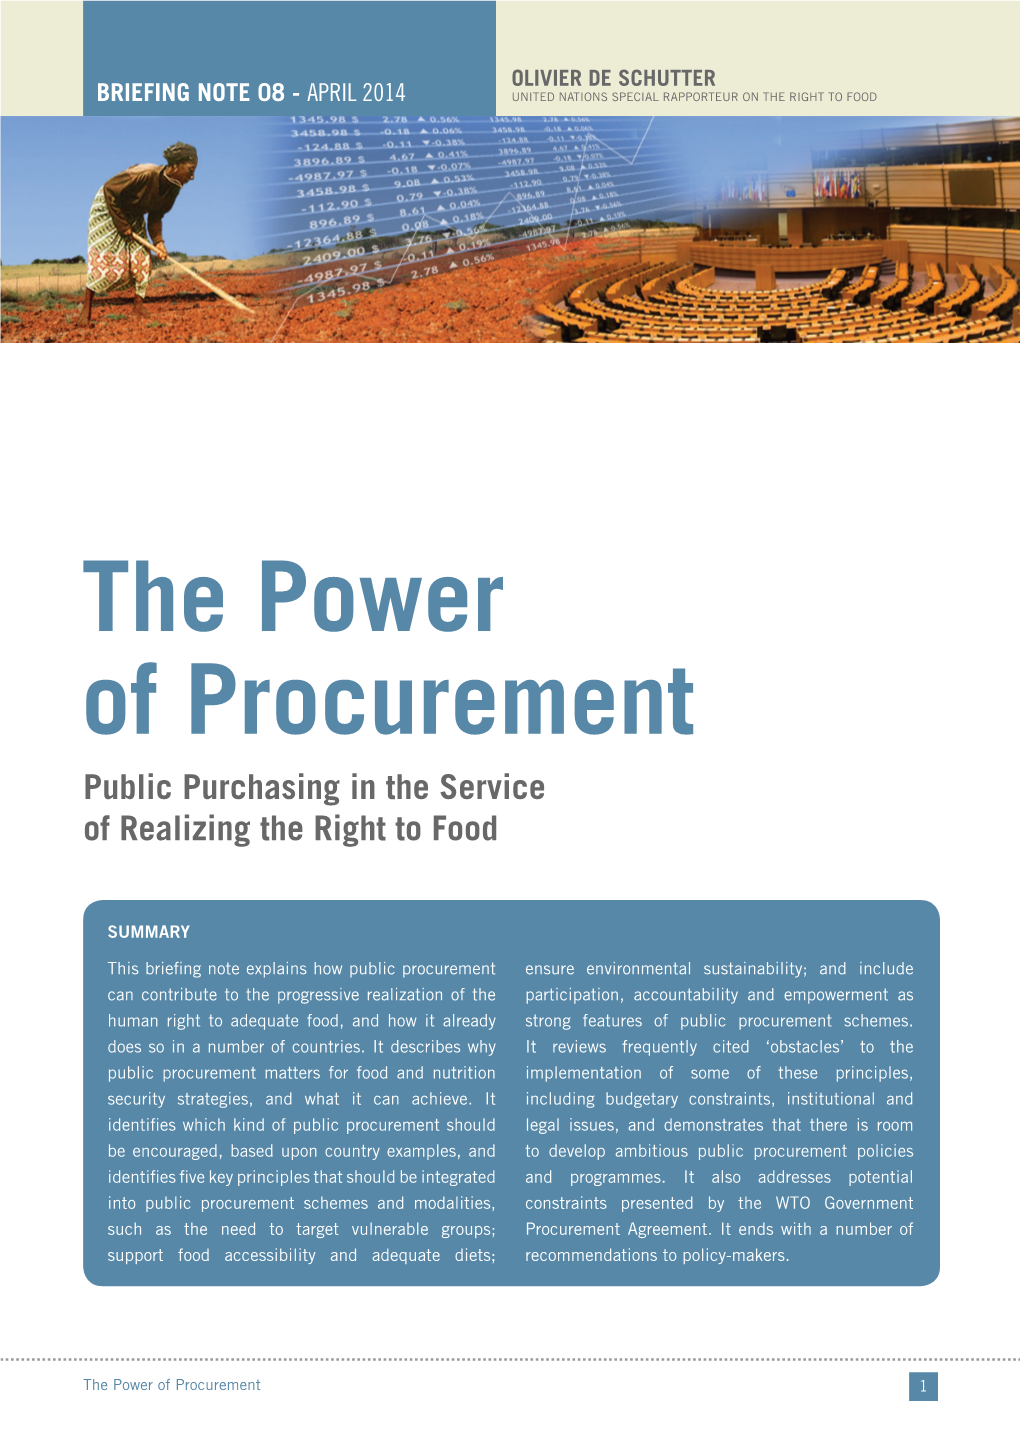 The Power of Procurement Public Purchasing in the Service of Realizing the Right to Food